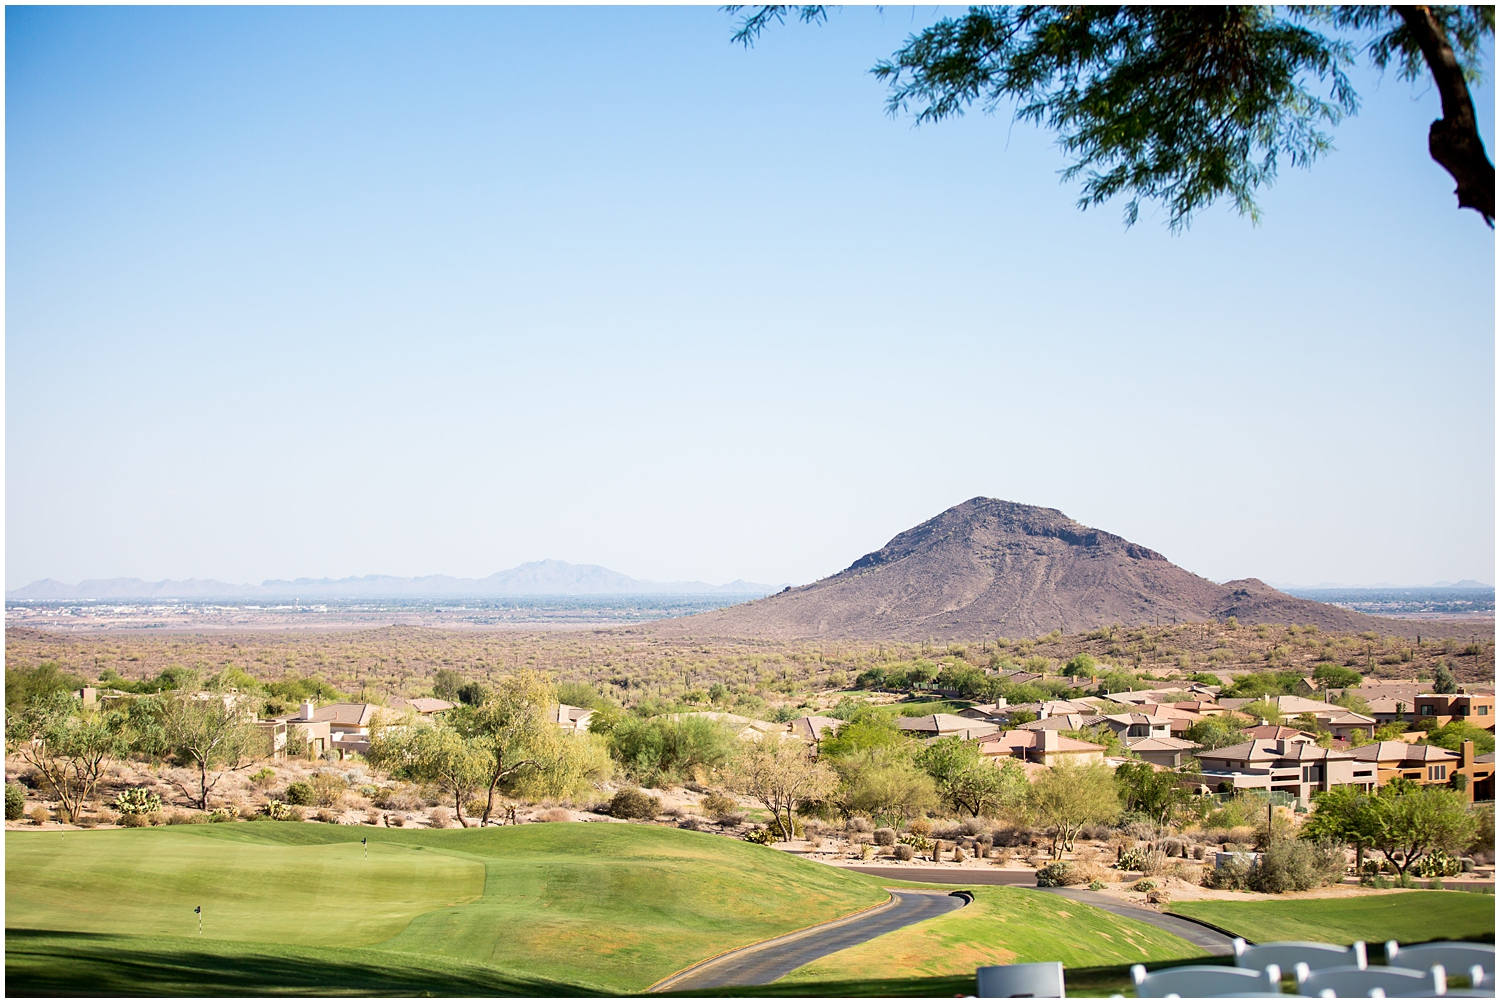 fountain hills eagle mountain golf resort course view